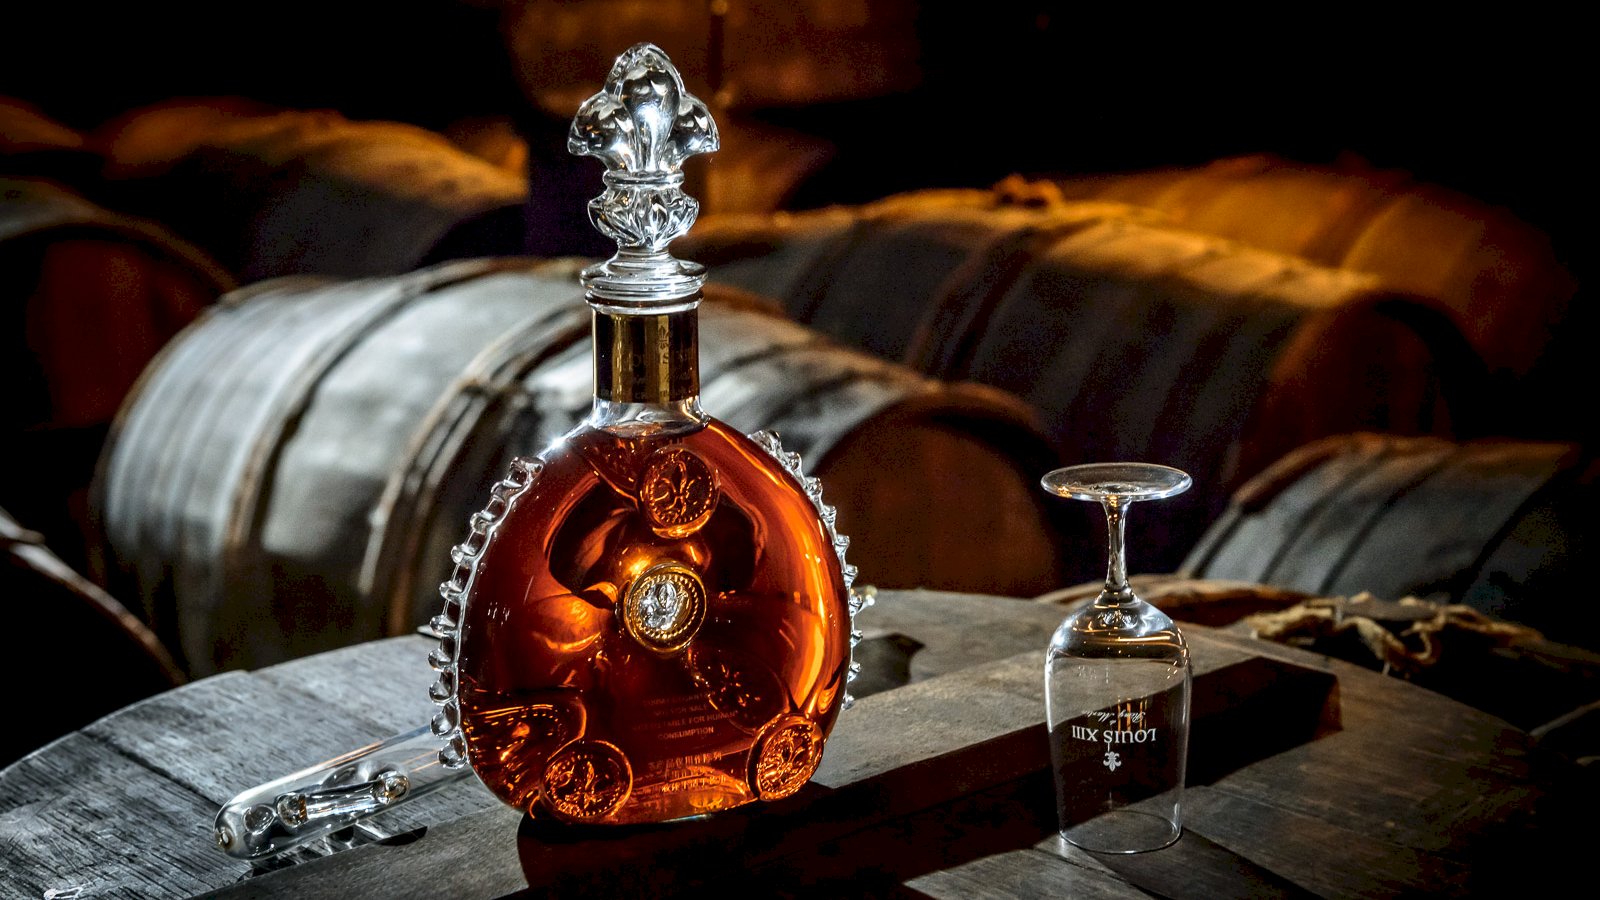 Ophorus Tours - A Private Visit, Tasting & Gastronomic Lunch Rémy Martin Louis XIII Cognac Experience